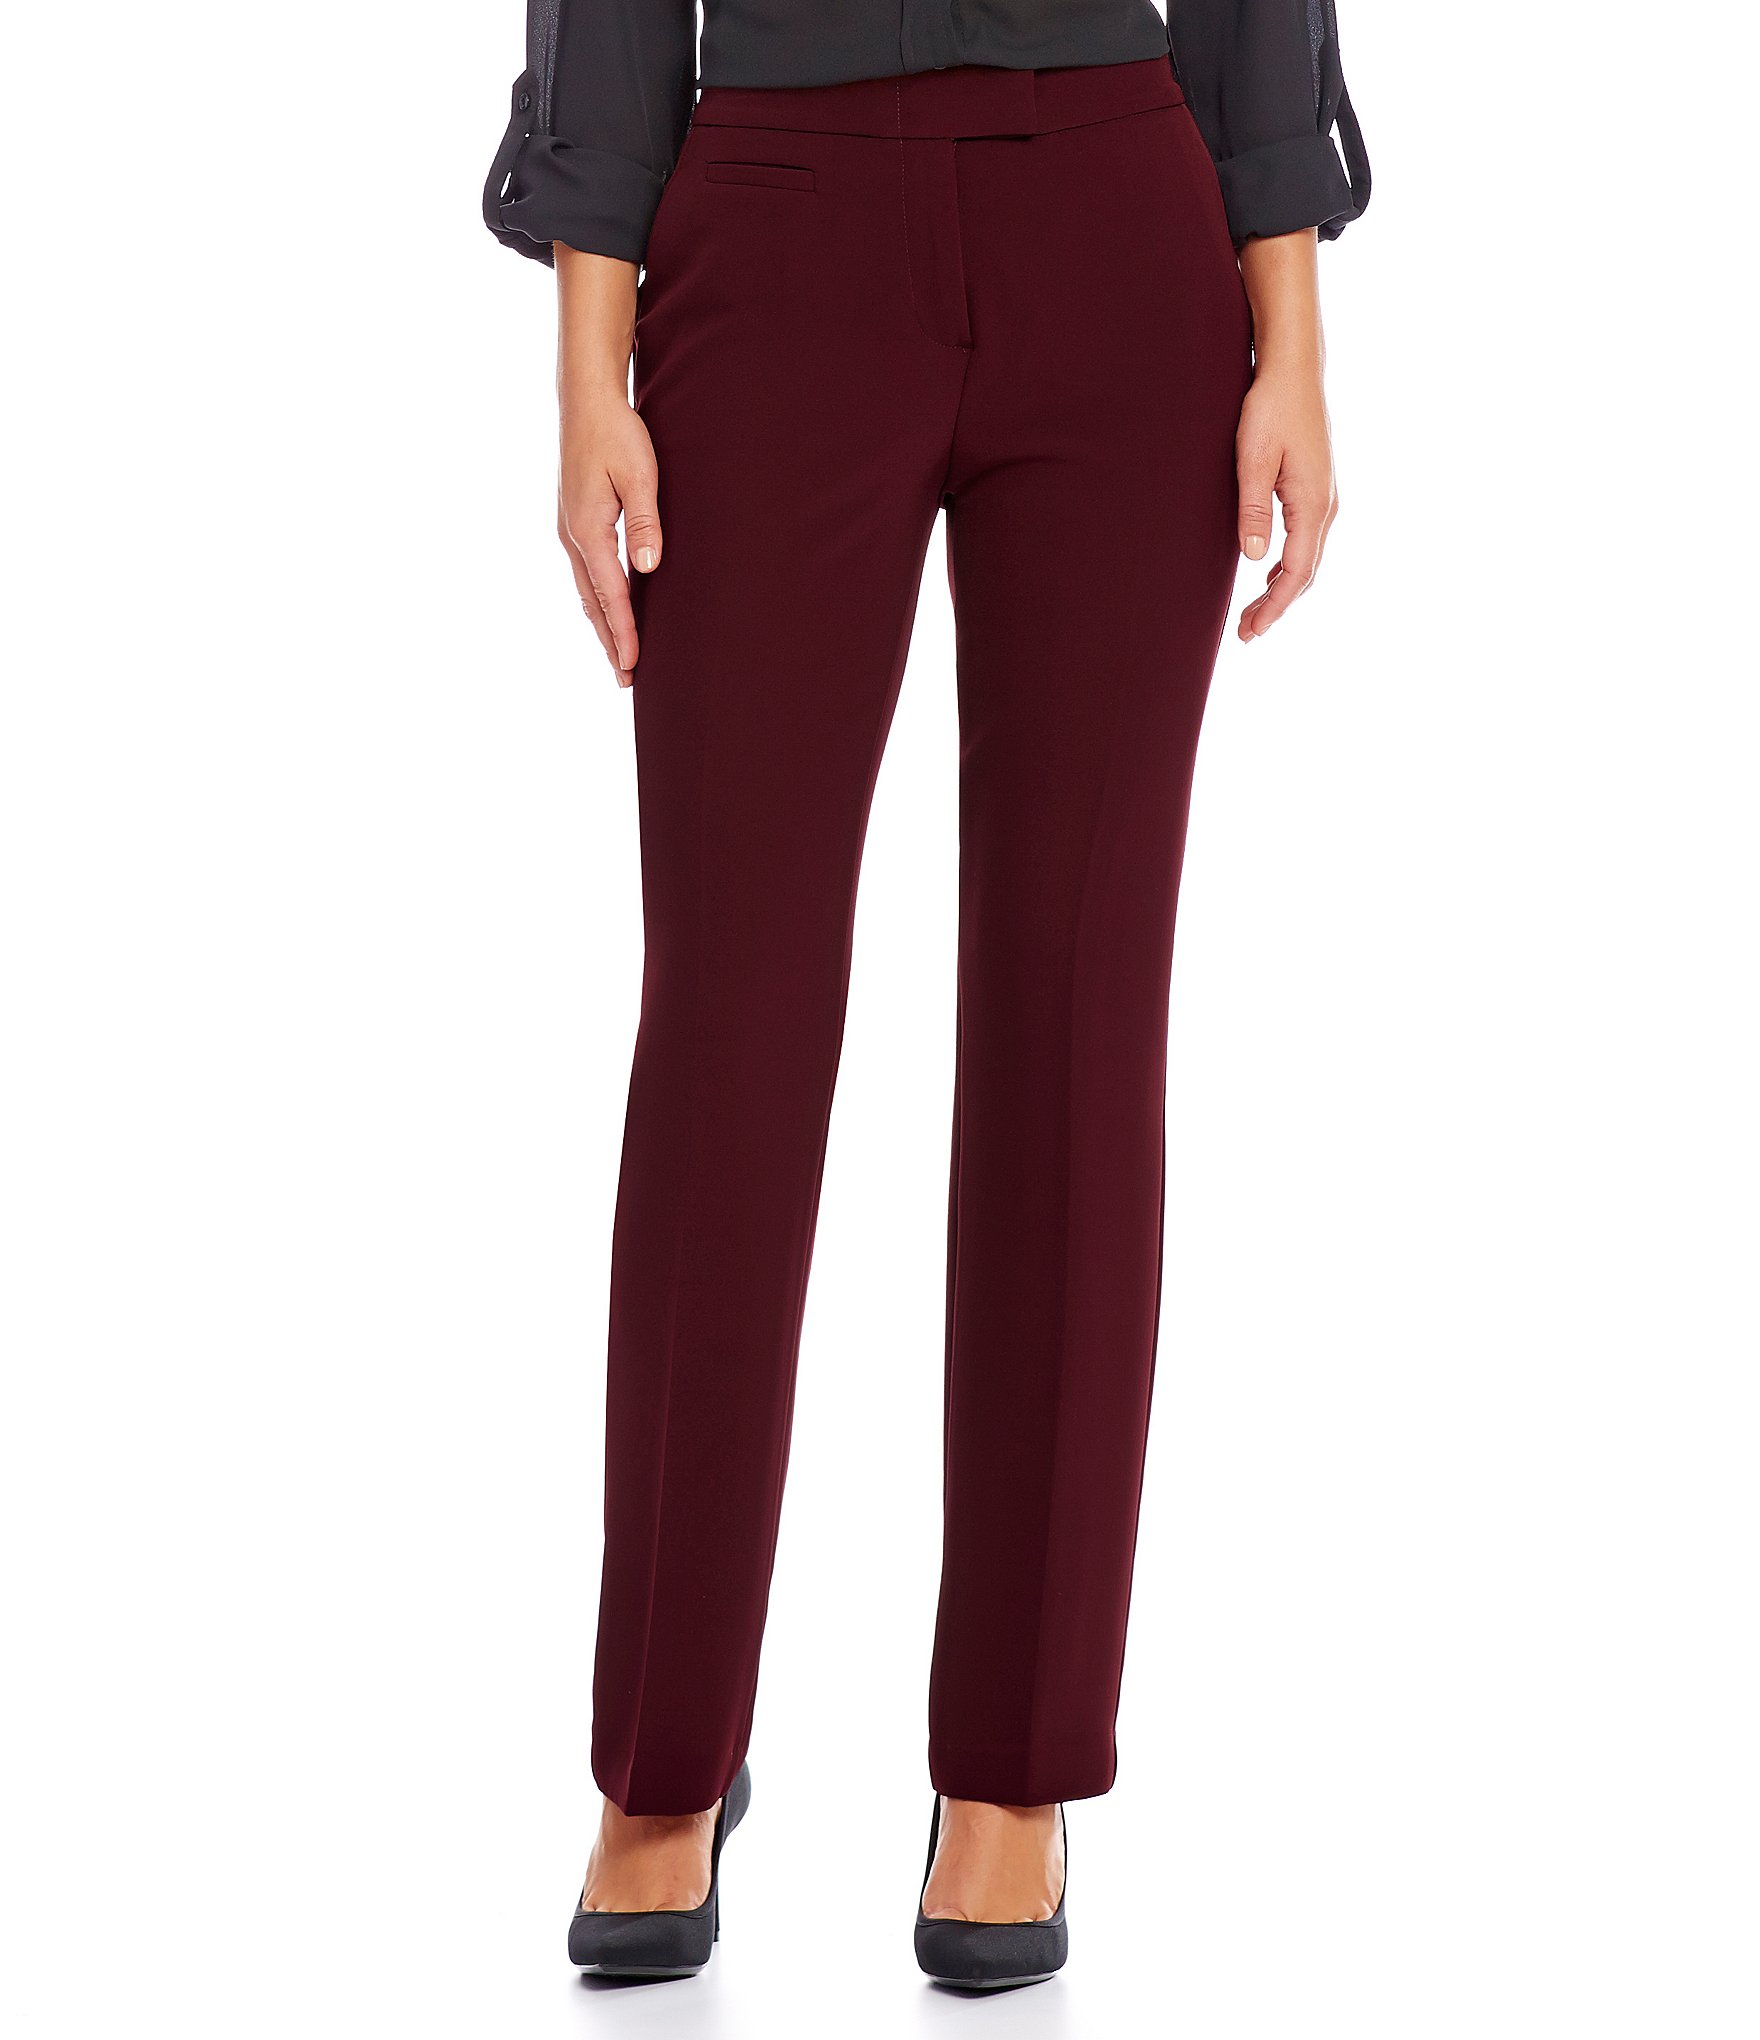 Investments the 5TH AVE fit Straight Leg Pants | Dillards